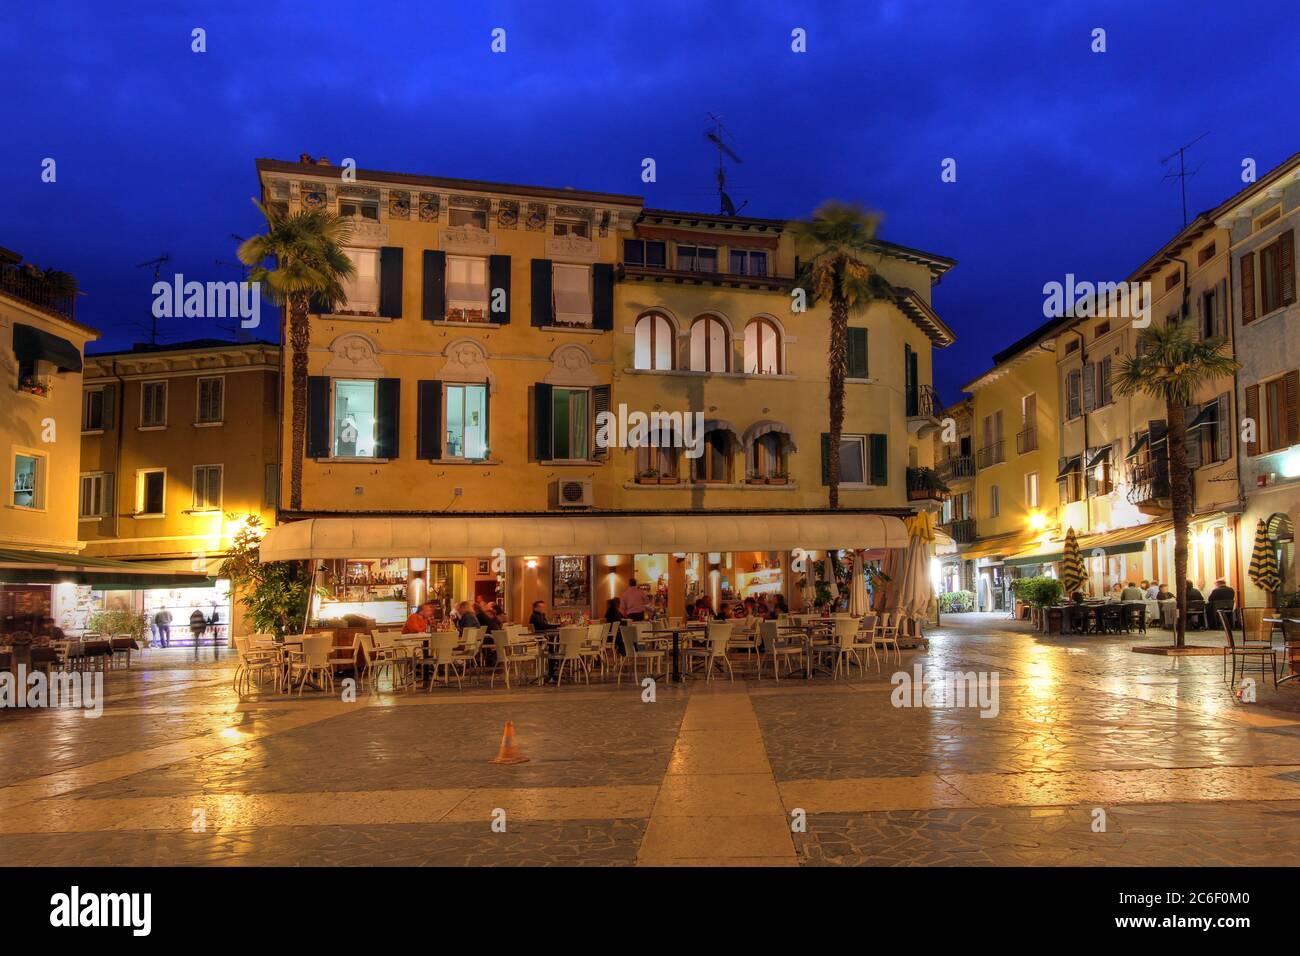 Night scene in the old town of Sirmione, Italy, more specifically the lively atmosphere of Carducci Square with its many restaurants. Sirmione is a co Stock Photo